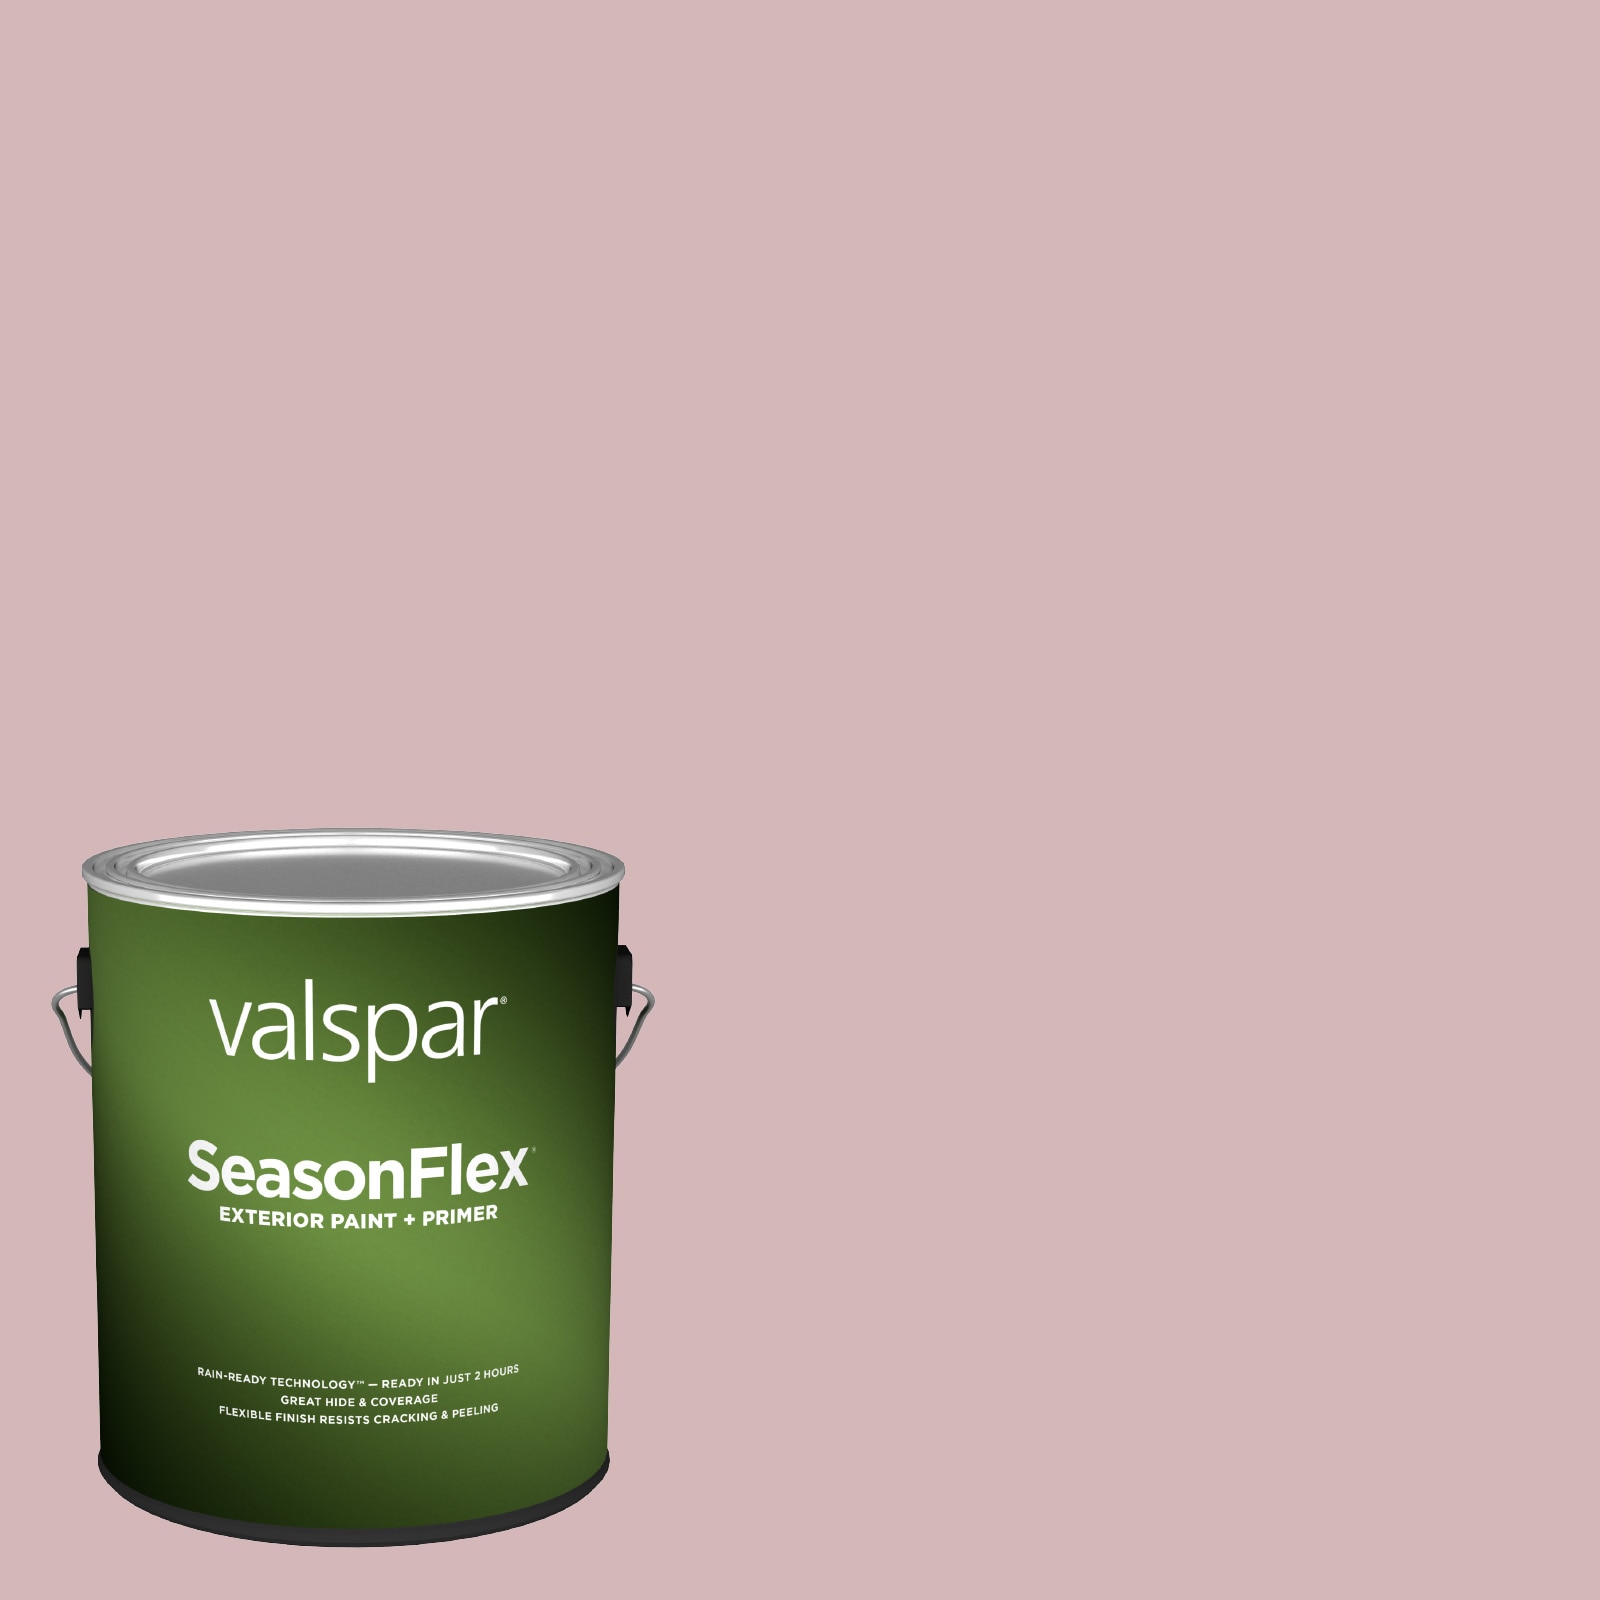 Valspar 1008-8B Soft Pink Precisely Matched For Paint and Spray Paint